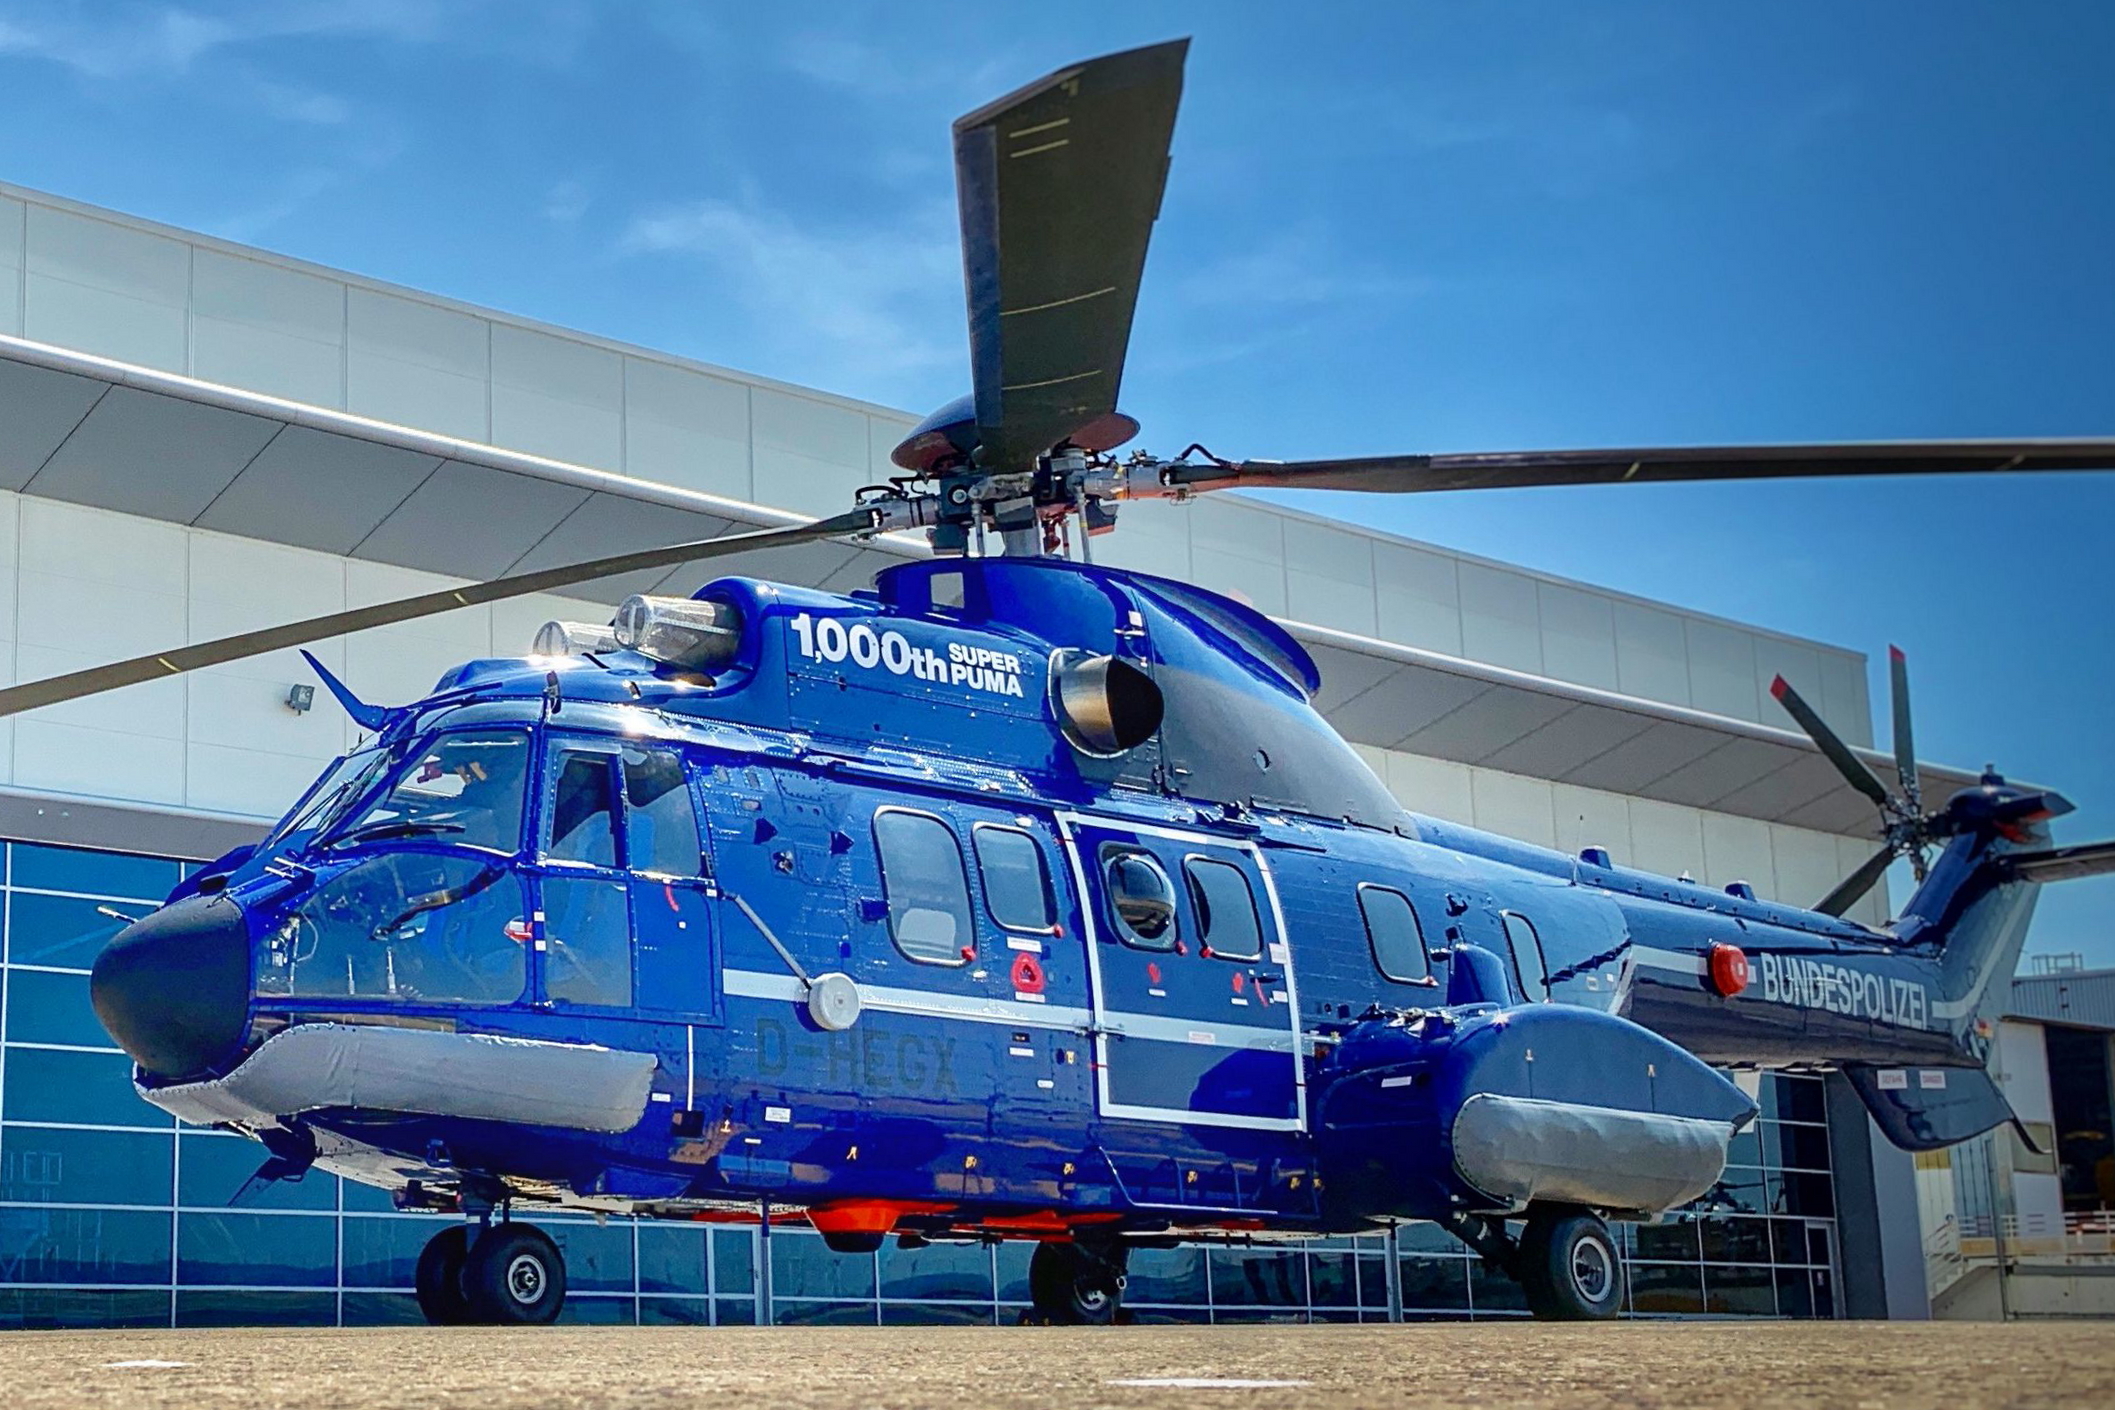 Airbus Delivers 1,000th Puma Helicopter